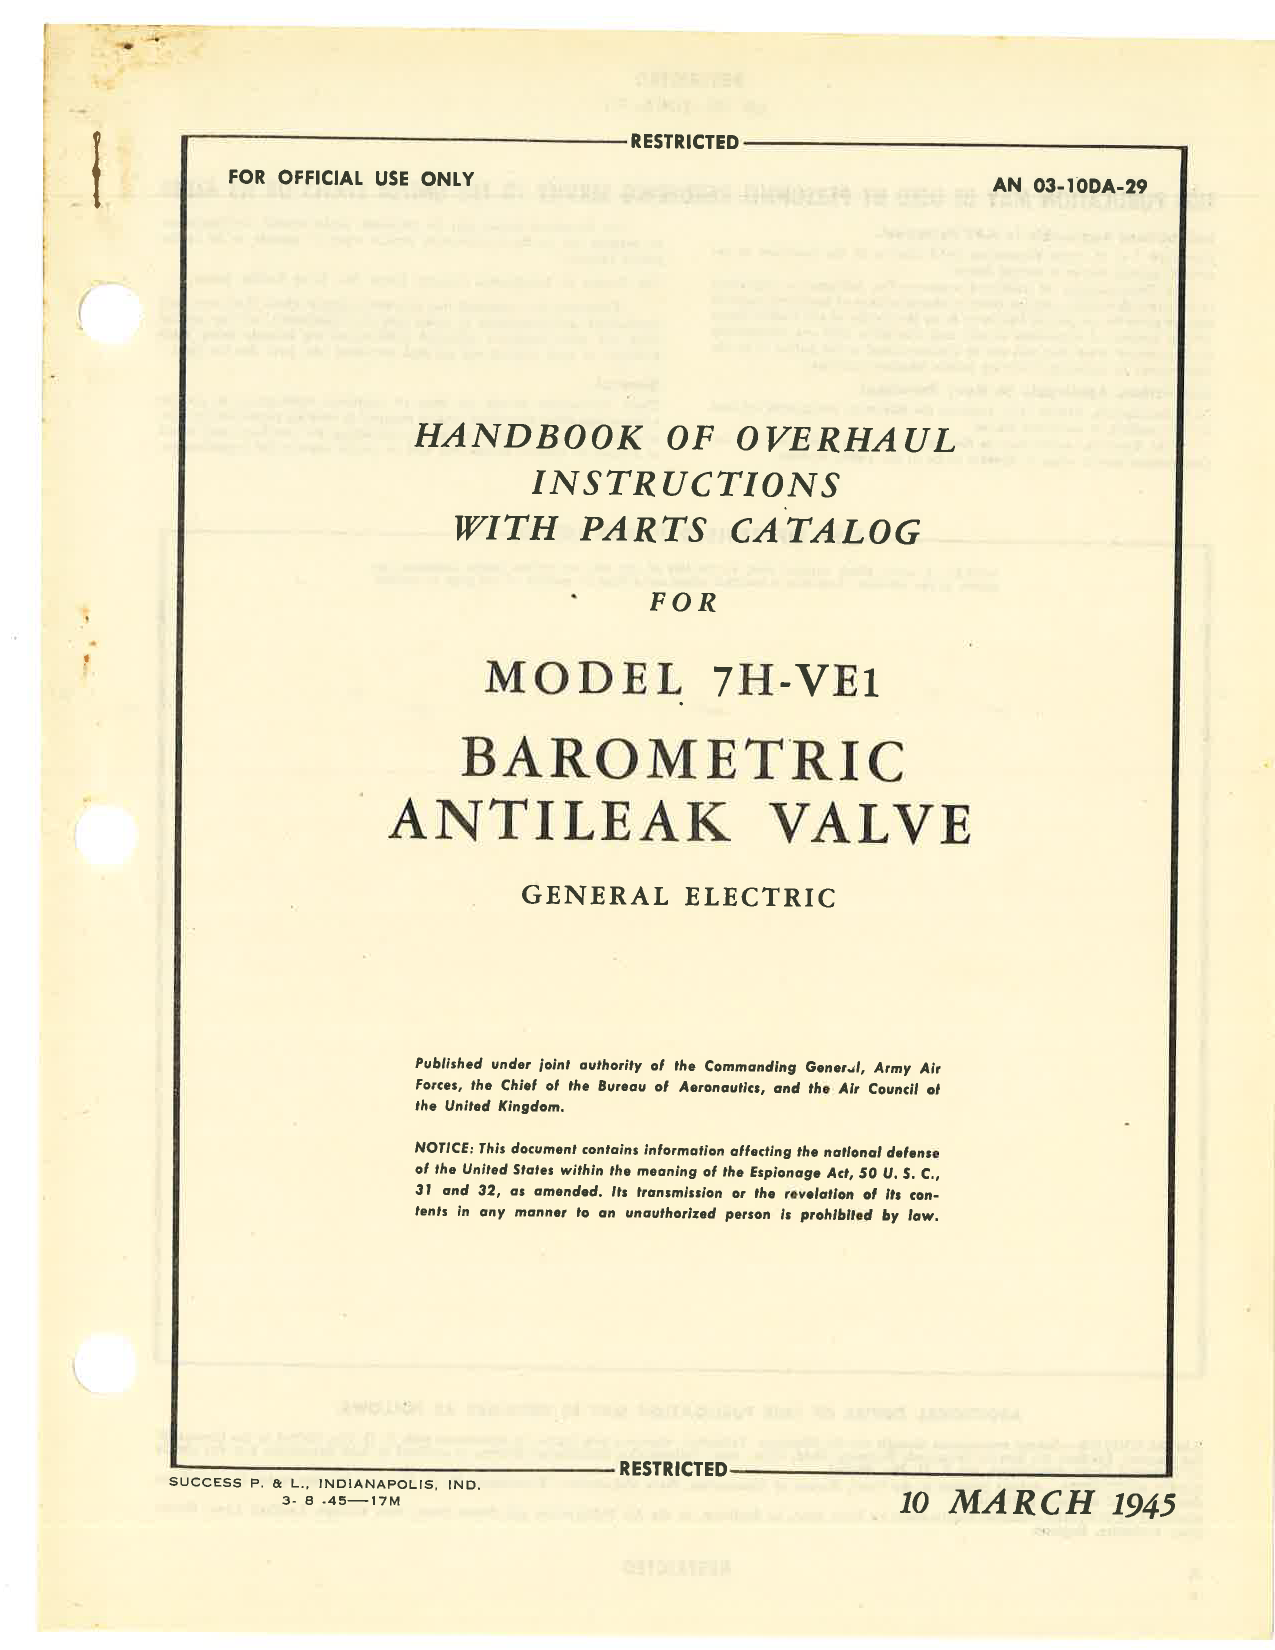 Sample page 1 from AirCorps Library document: Overhaul Instructions with Parts Catalog for Model 7H-VE1 Barometric Antileak Valve